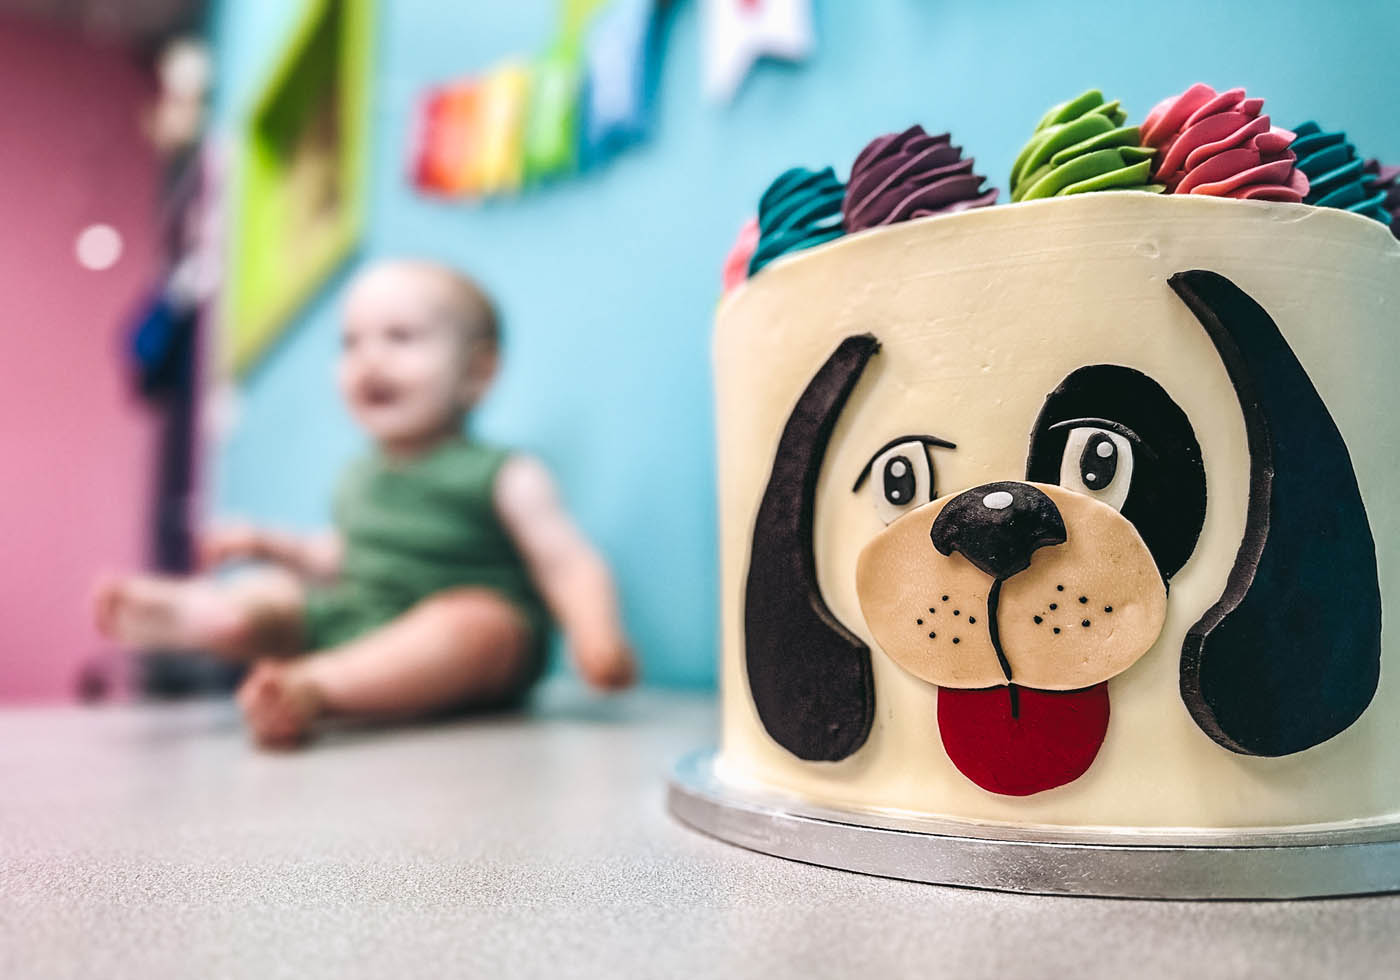 A baby sitting next to a Rompy birthday cake - contact Romp n' Roll today to discuss birthday party franchise opportunities.